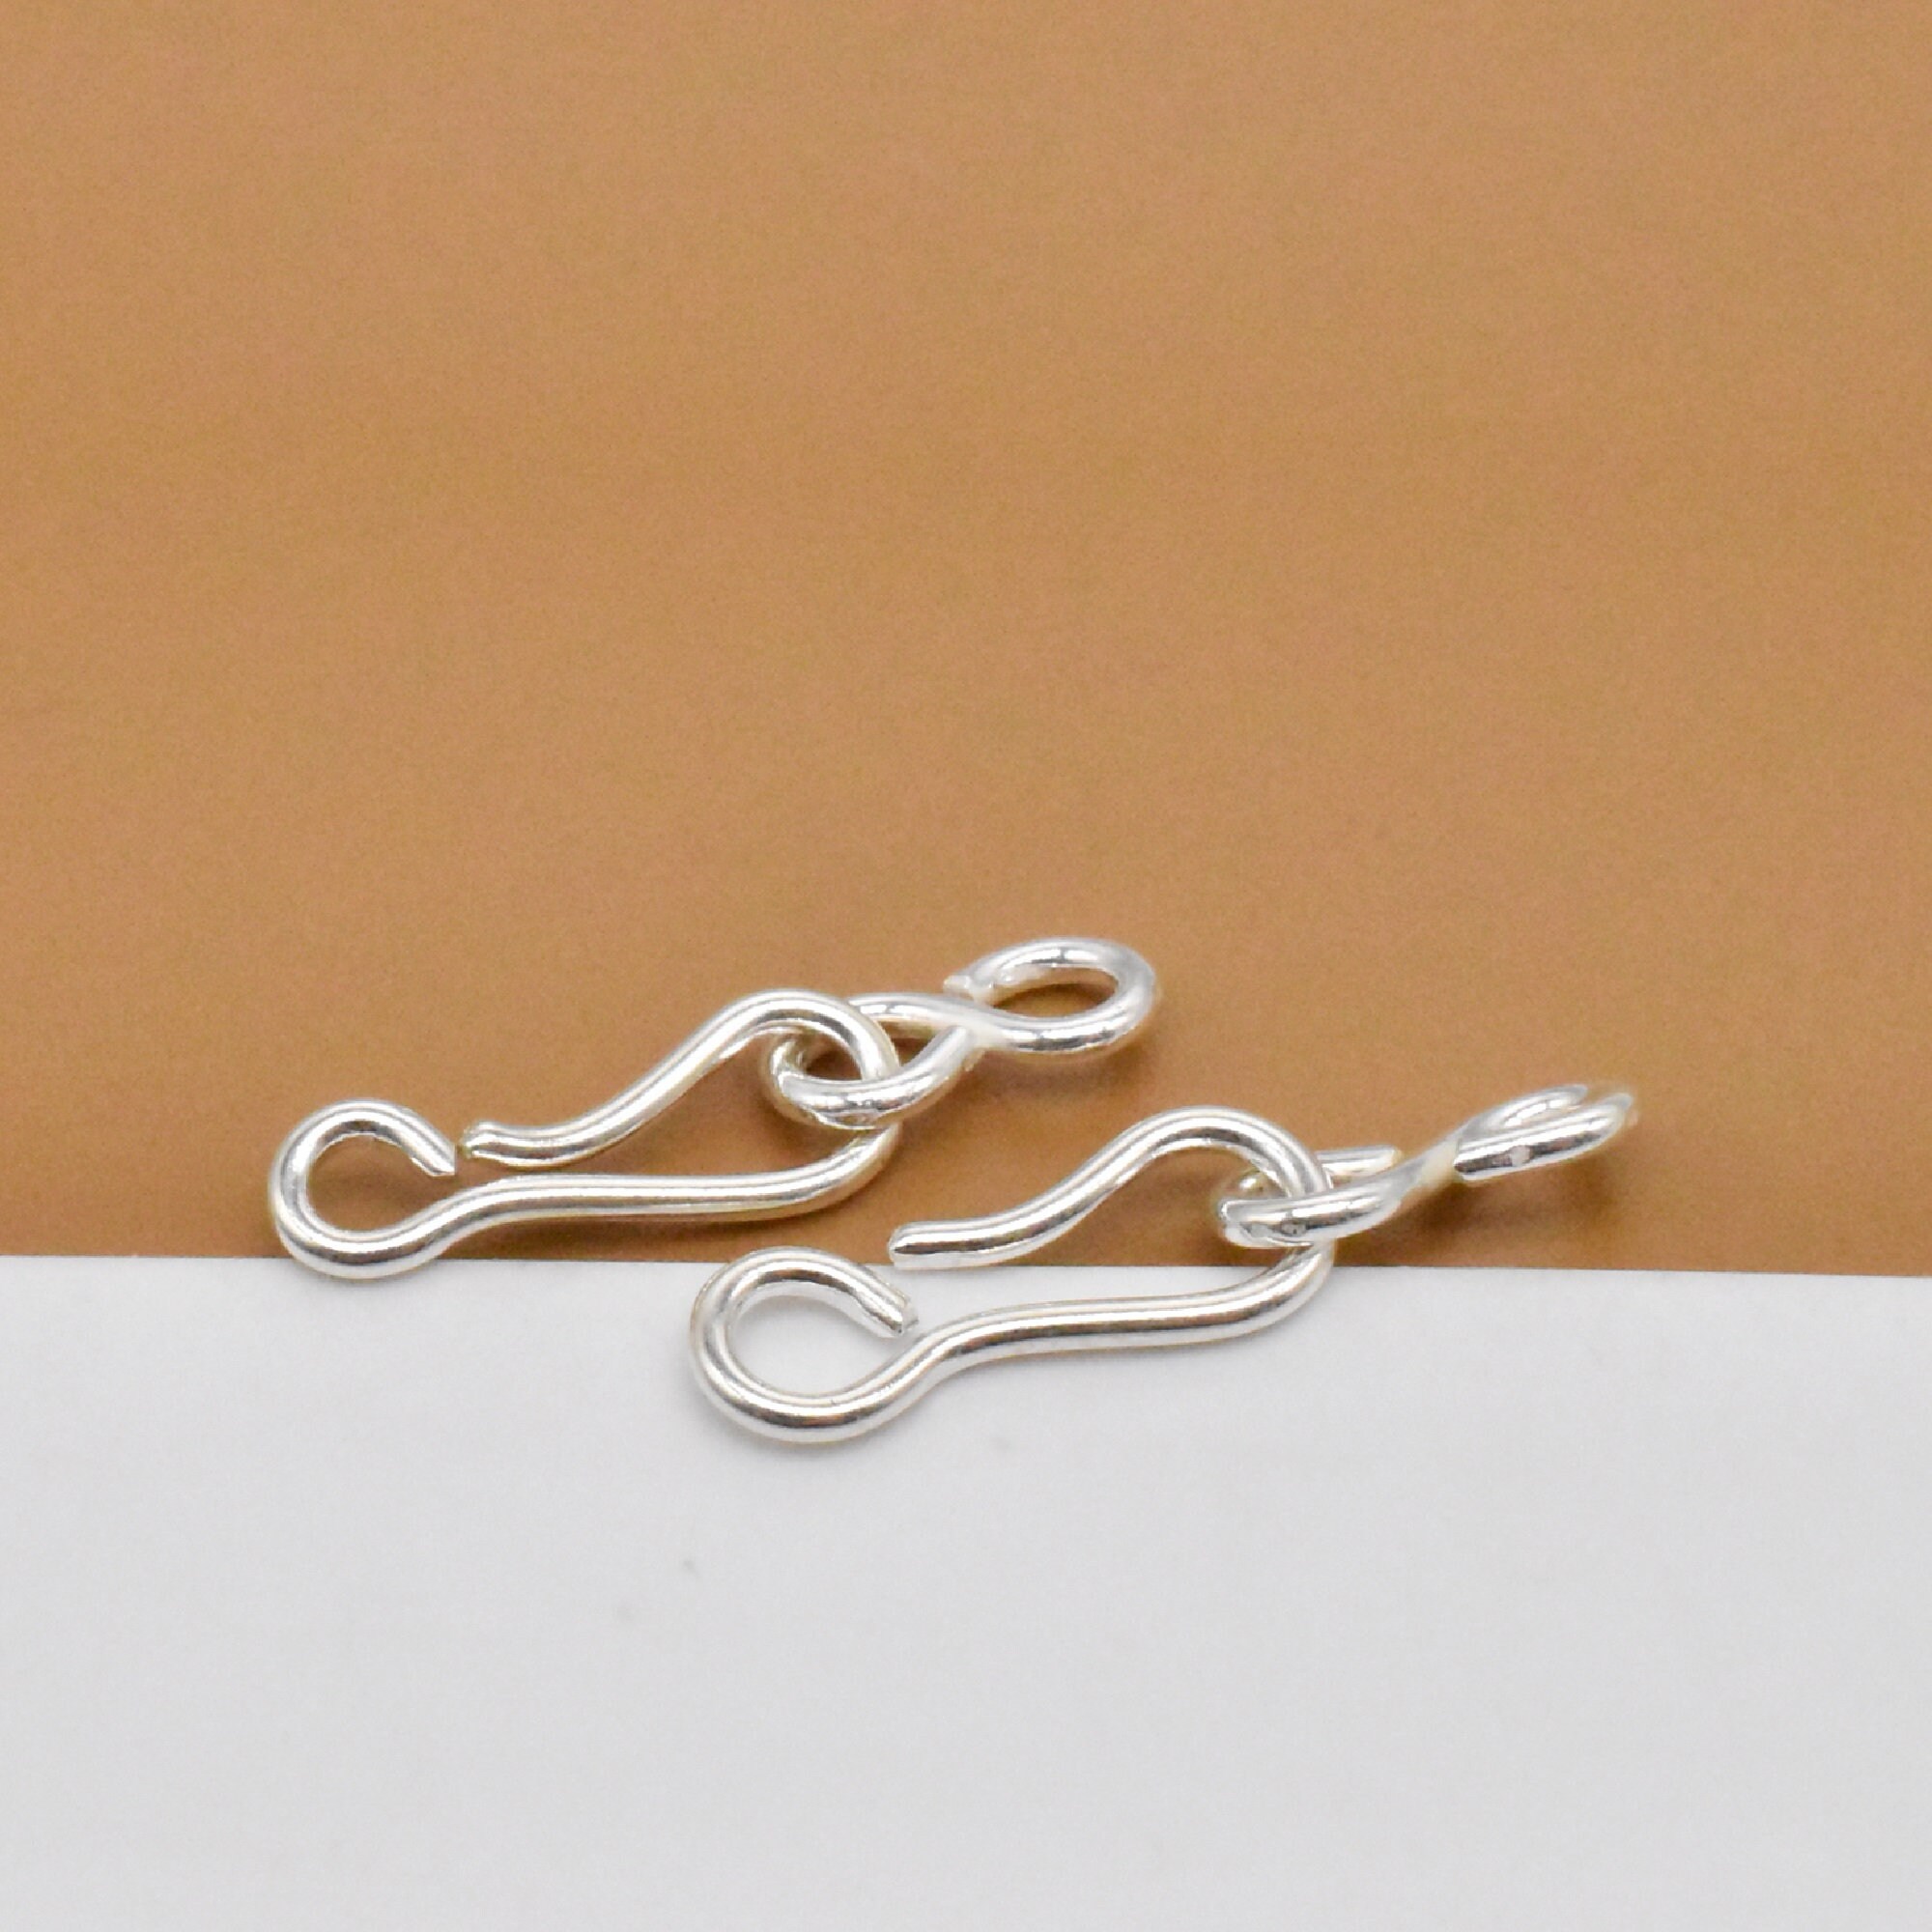 5 Sterling Silver Hook and Eye Clasps, 925 Silver Hook Clasps, Hook and Eye  Connector, Infinity Link Connector, Clasp Connector for Necklace 